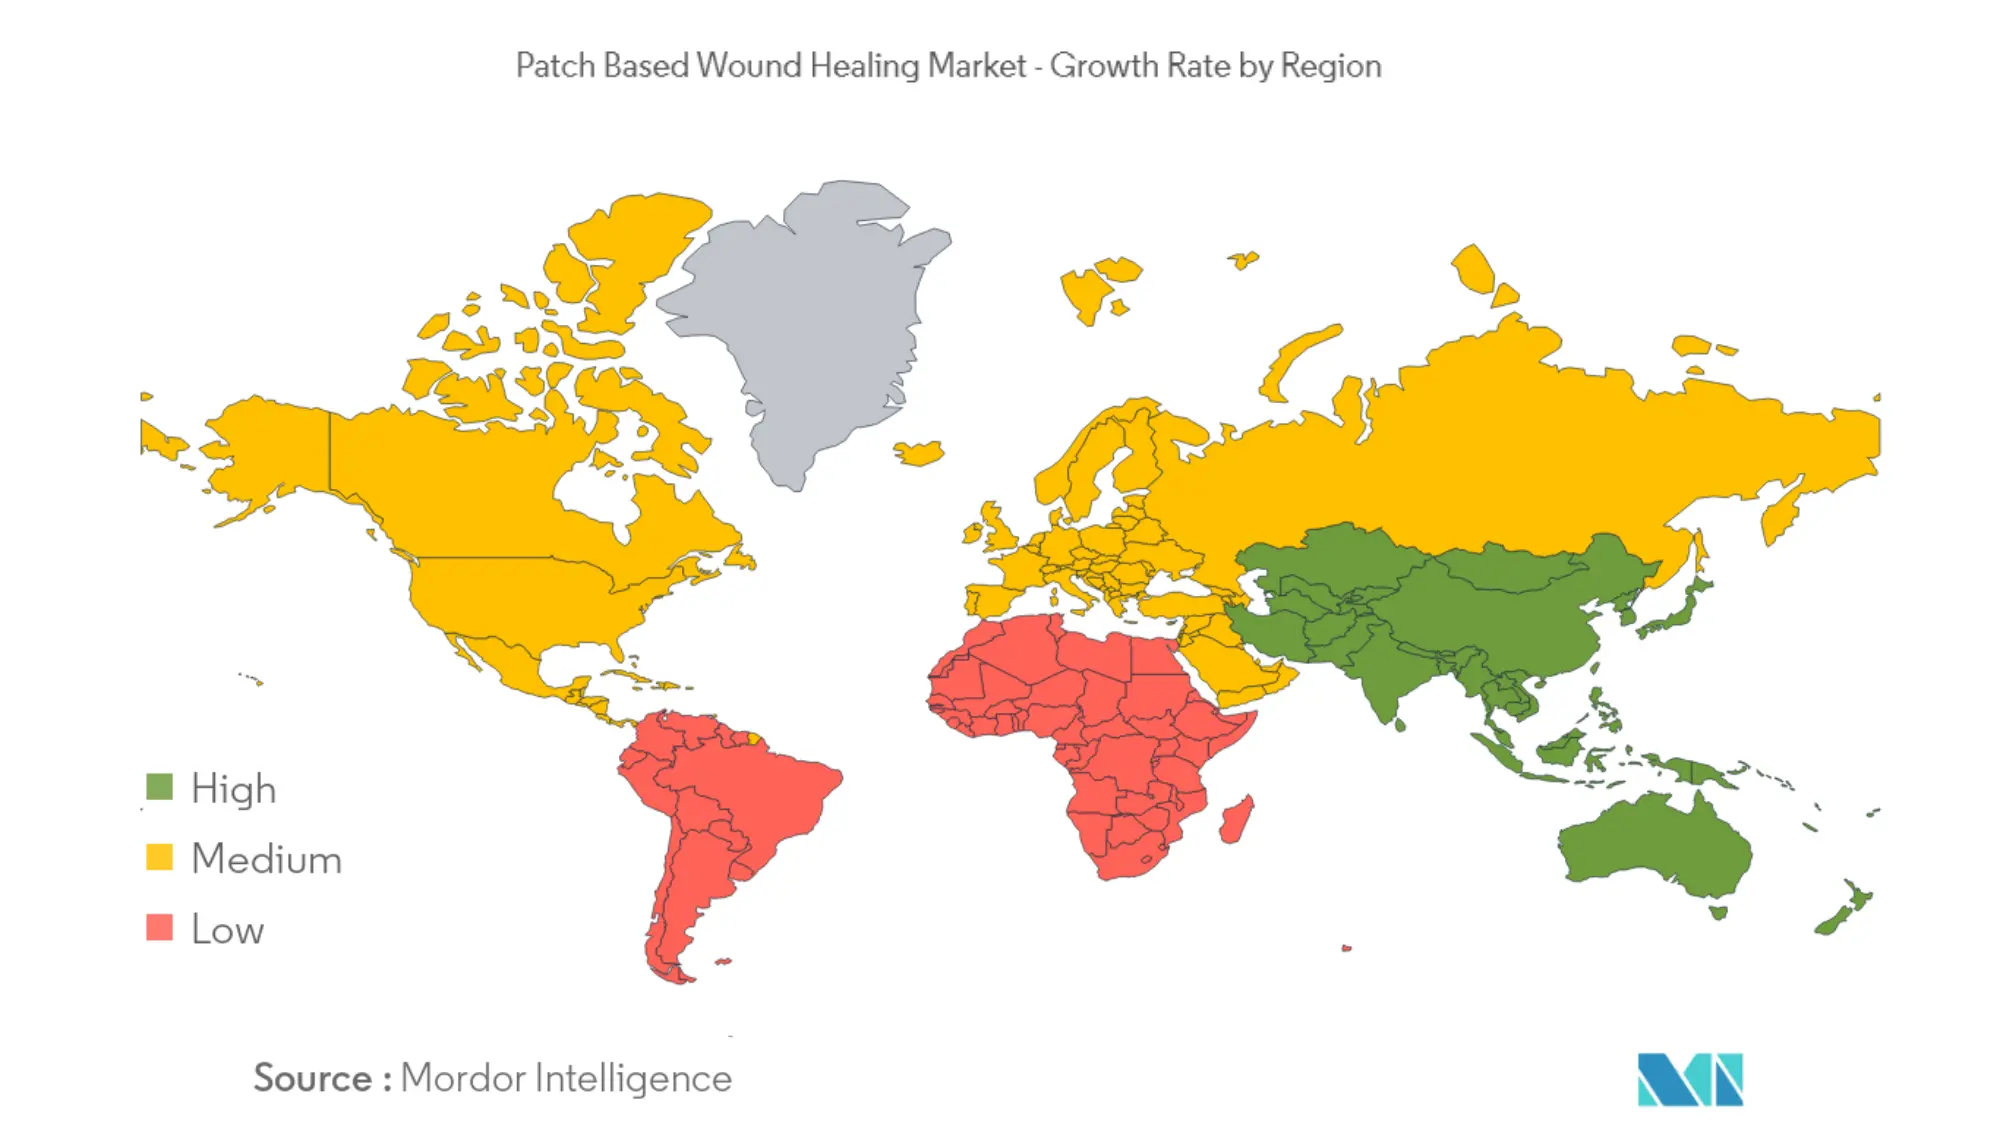 Patch Based Wound Healing Market